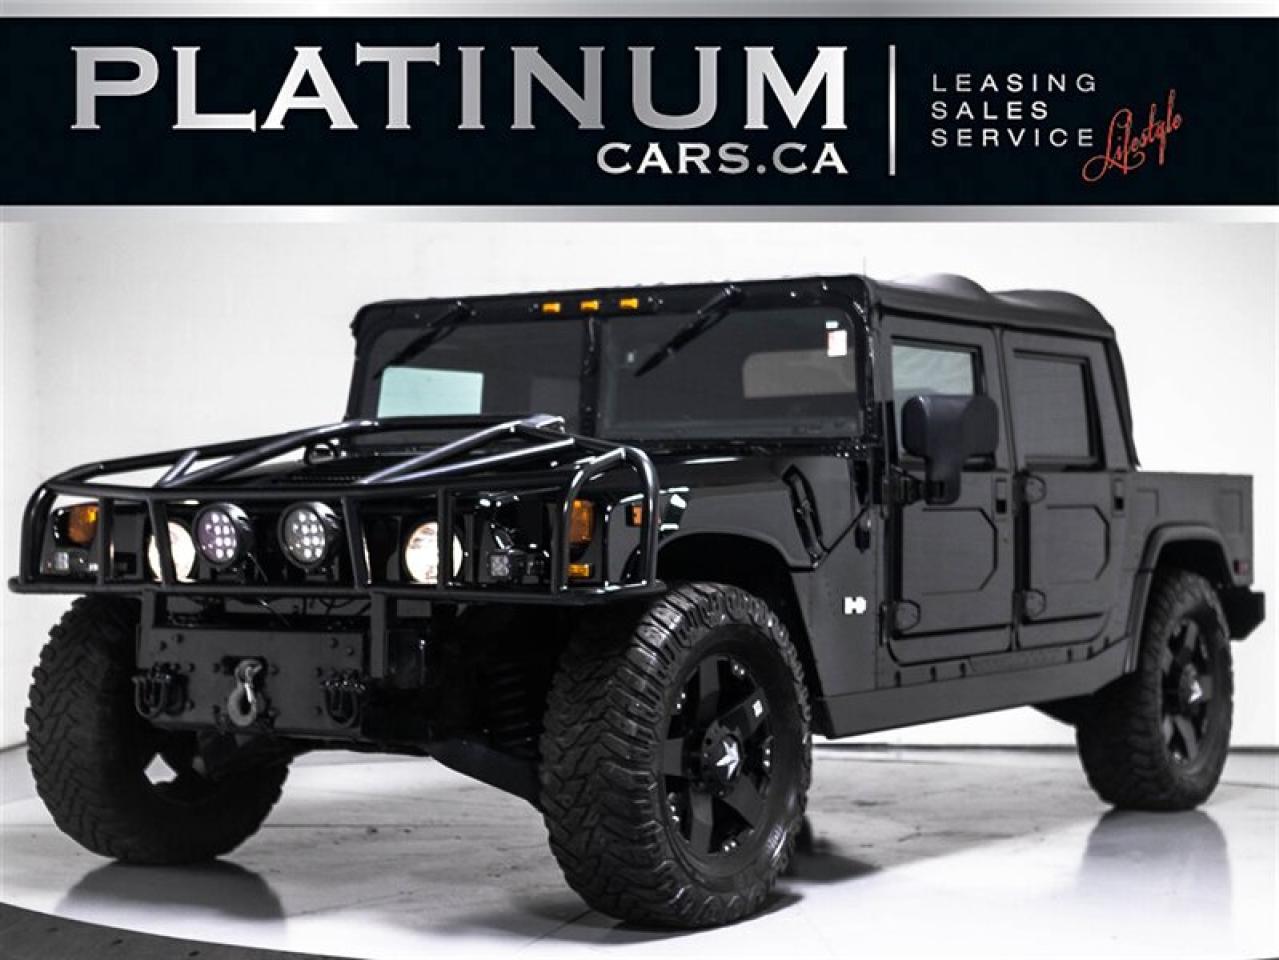 Used 2004 Hummer H1 Alpha Leather Interior Open Top Dvd